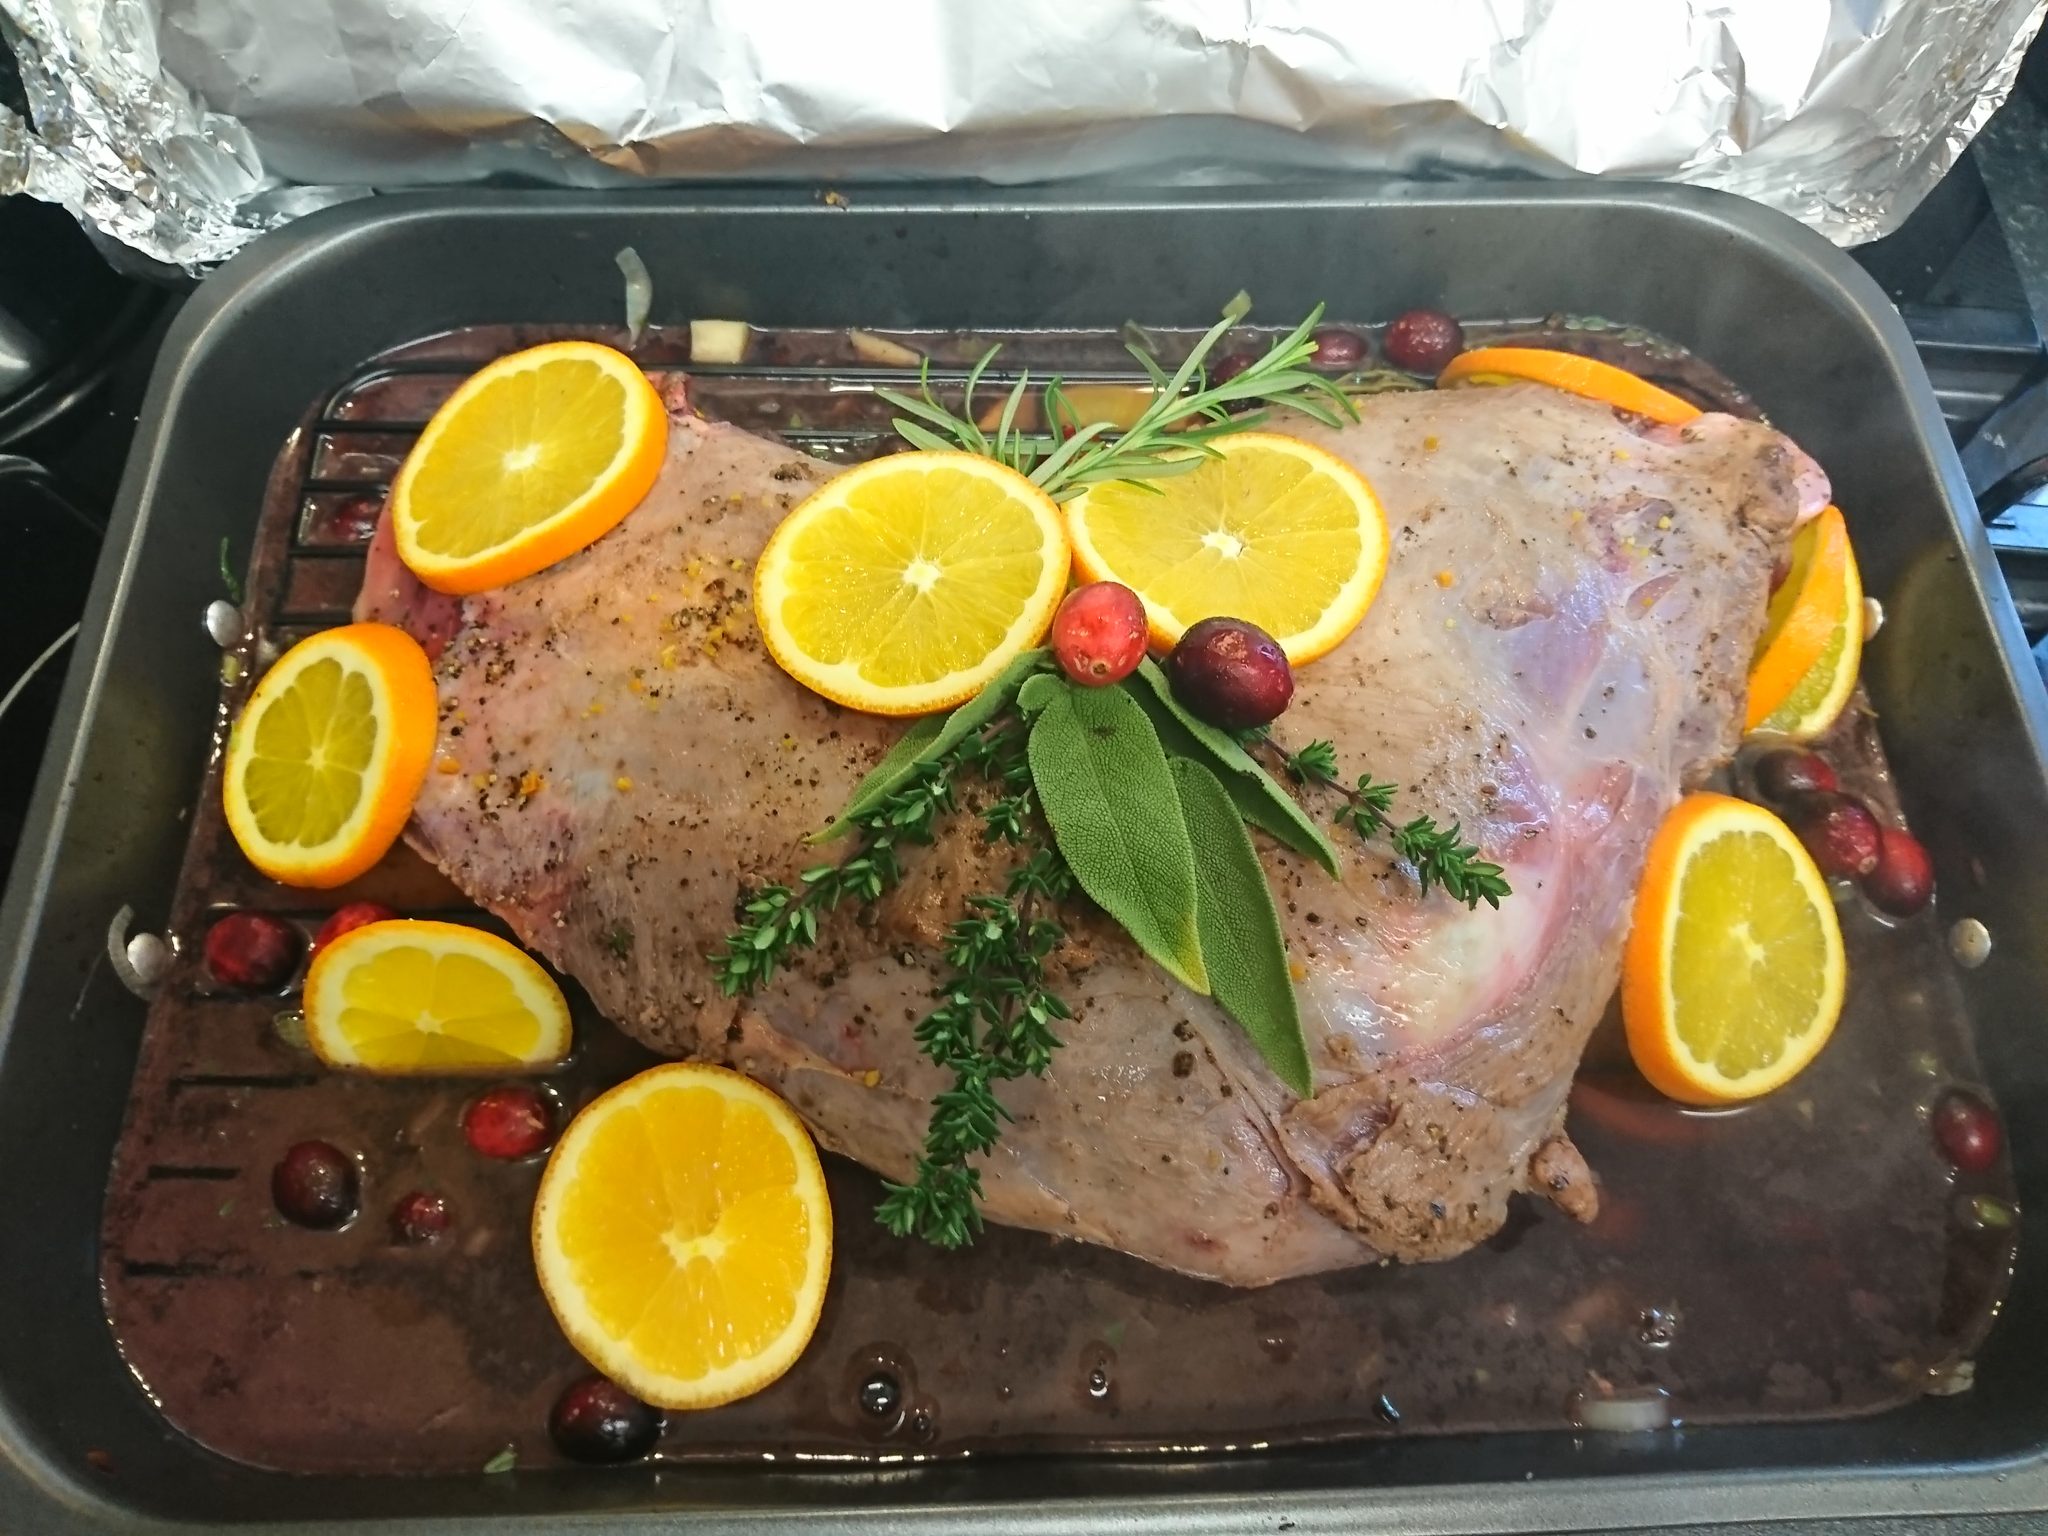 Venison prepared for roasting with cranberries, orange and thyme